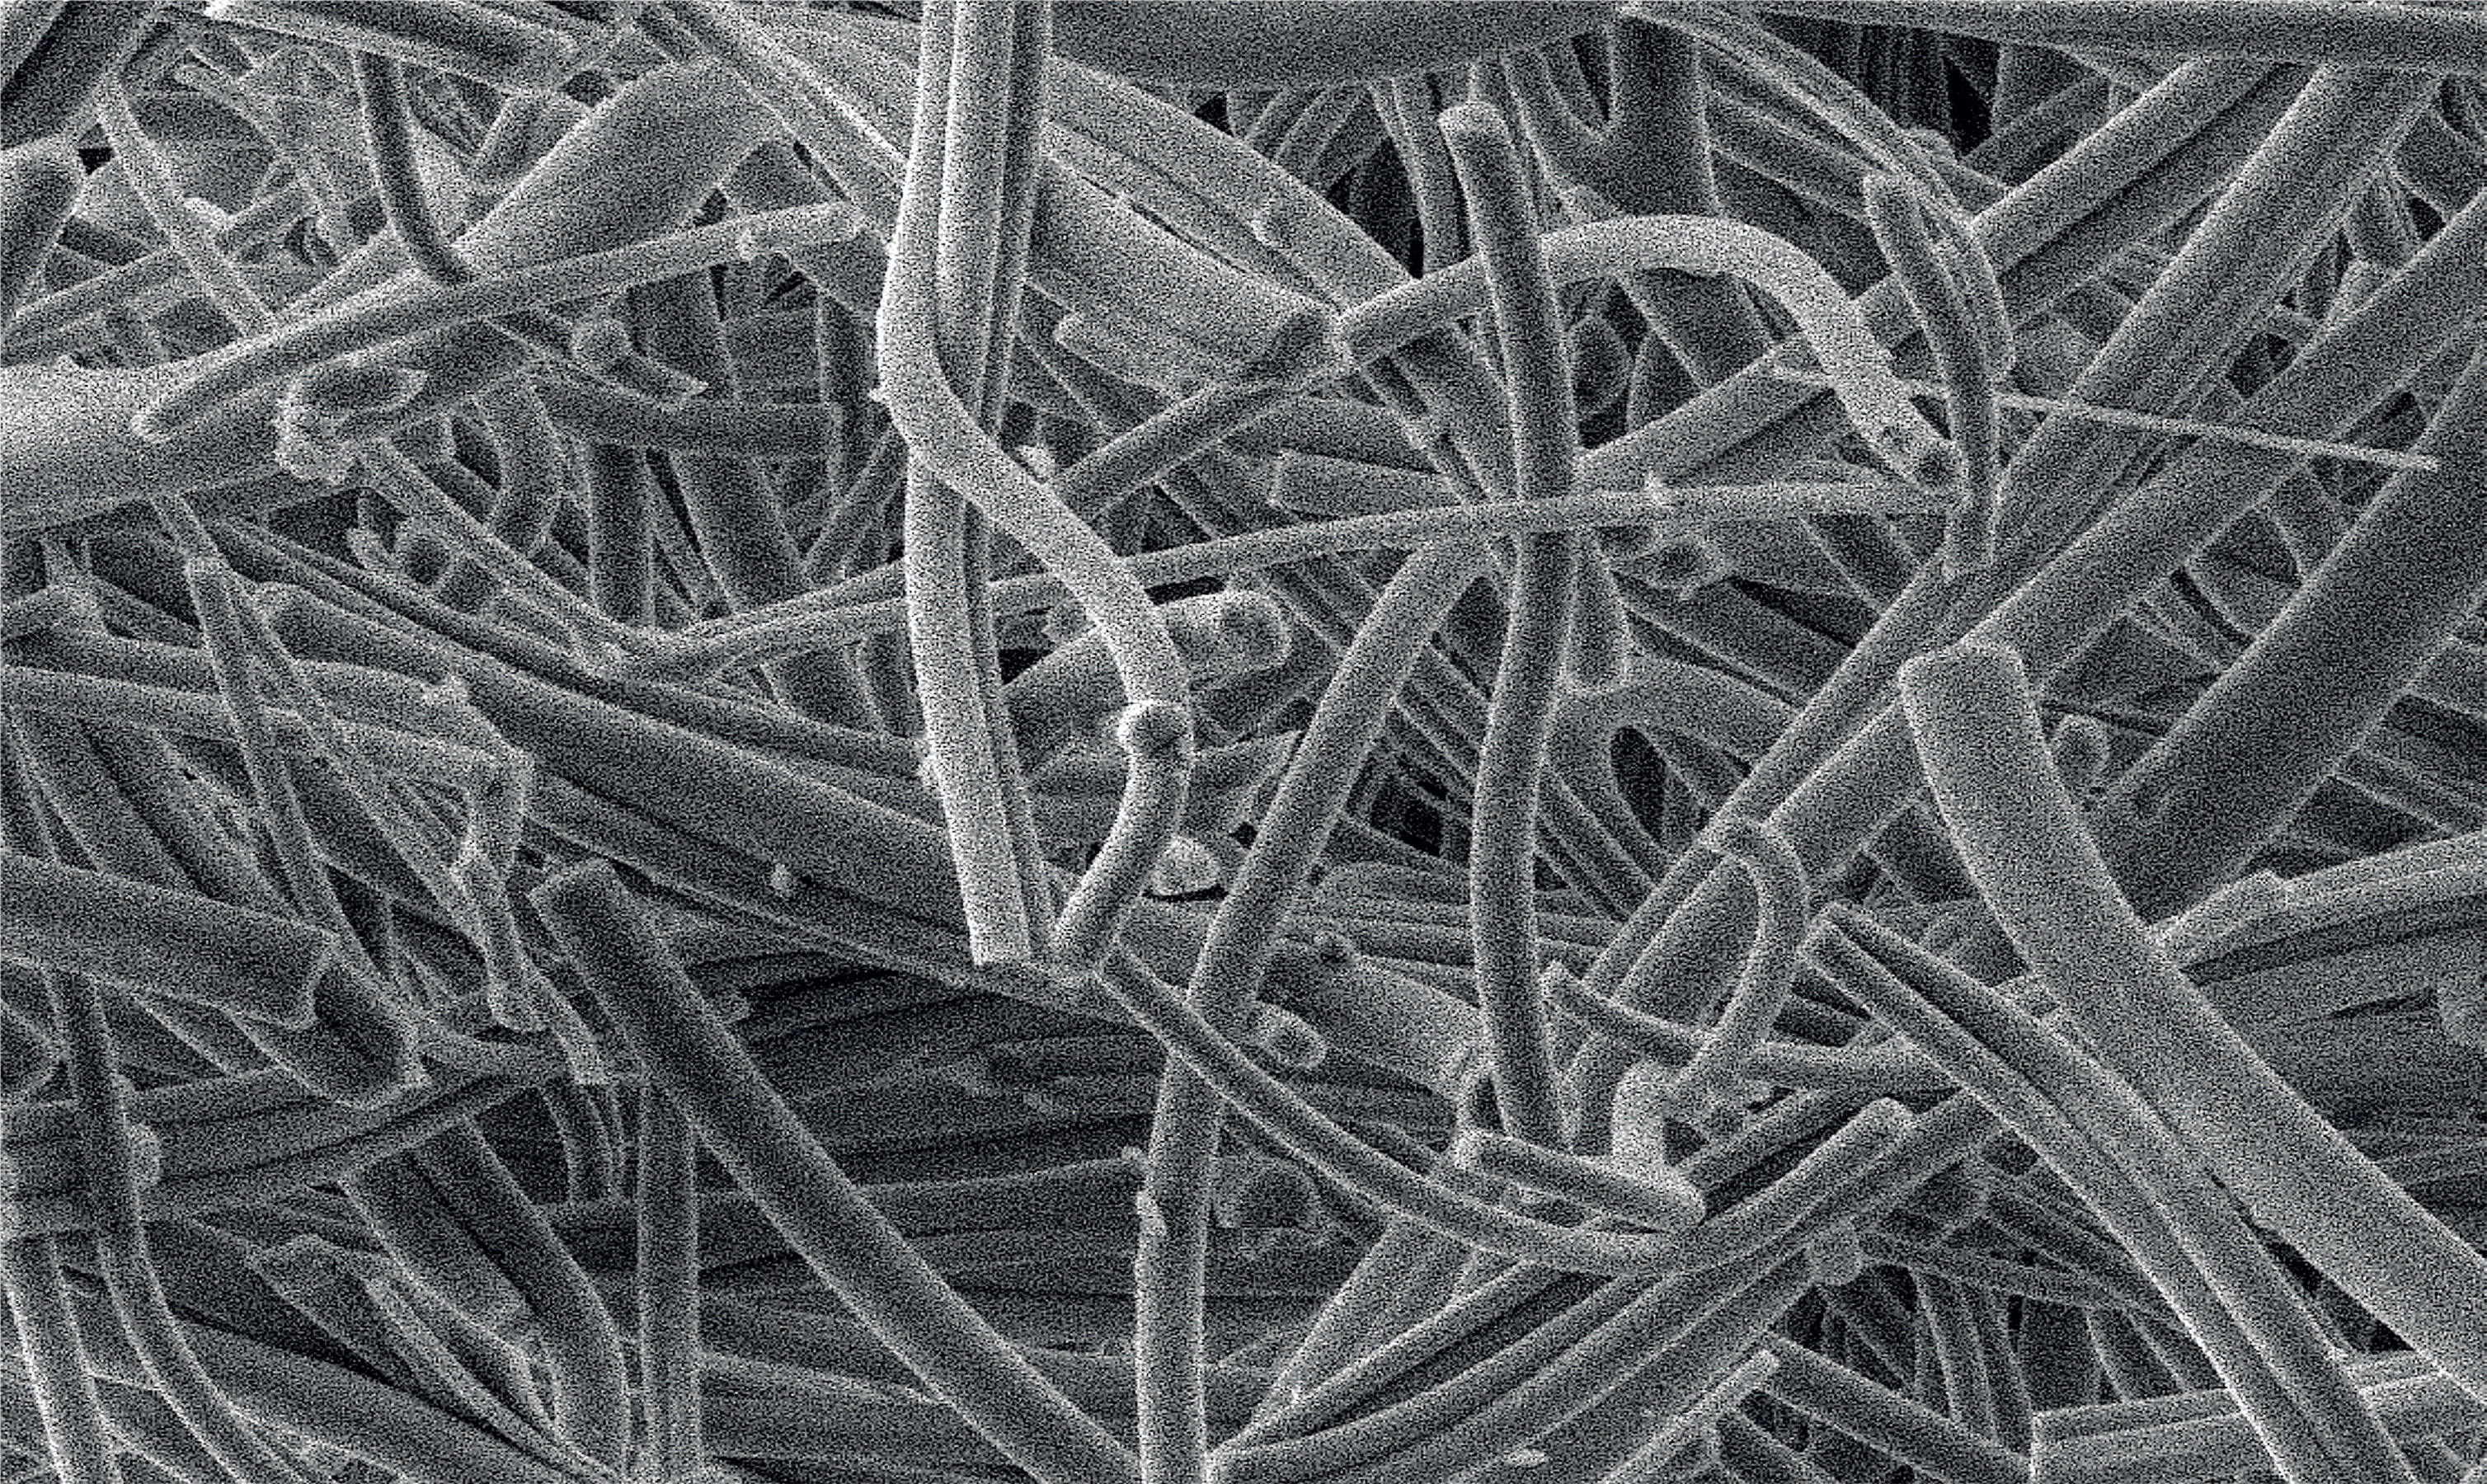 Silica Fibrous Material for Sorption, Separation, Catalytic and Battery Applications